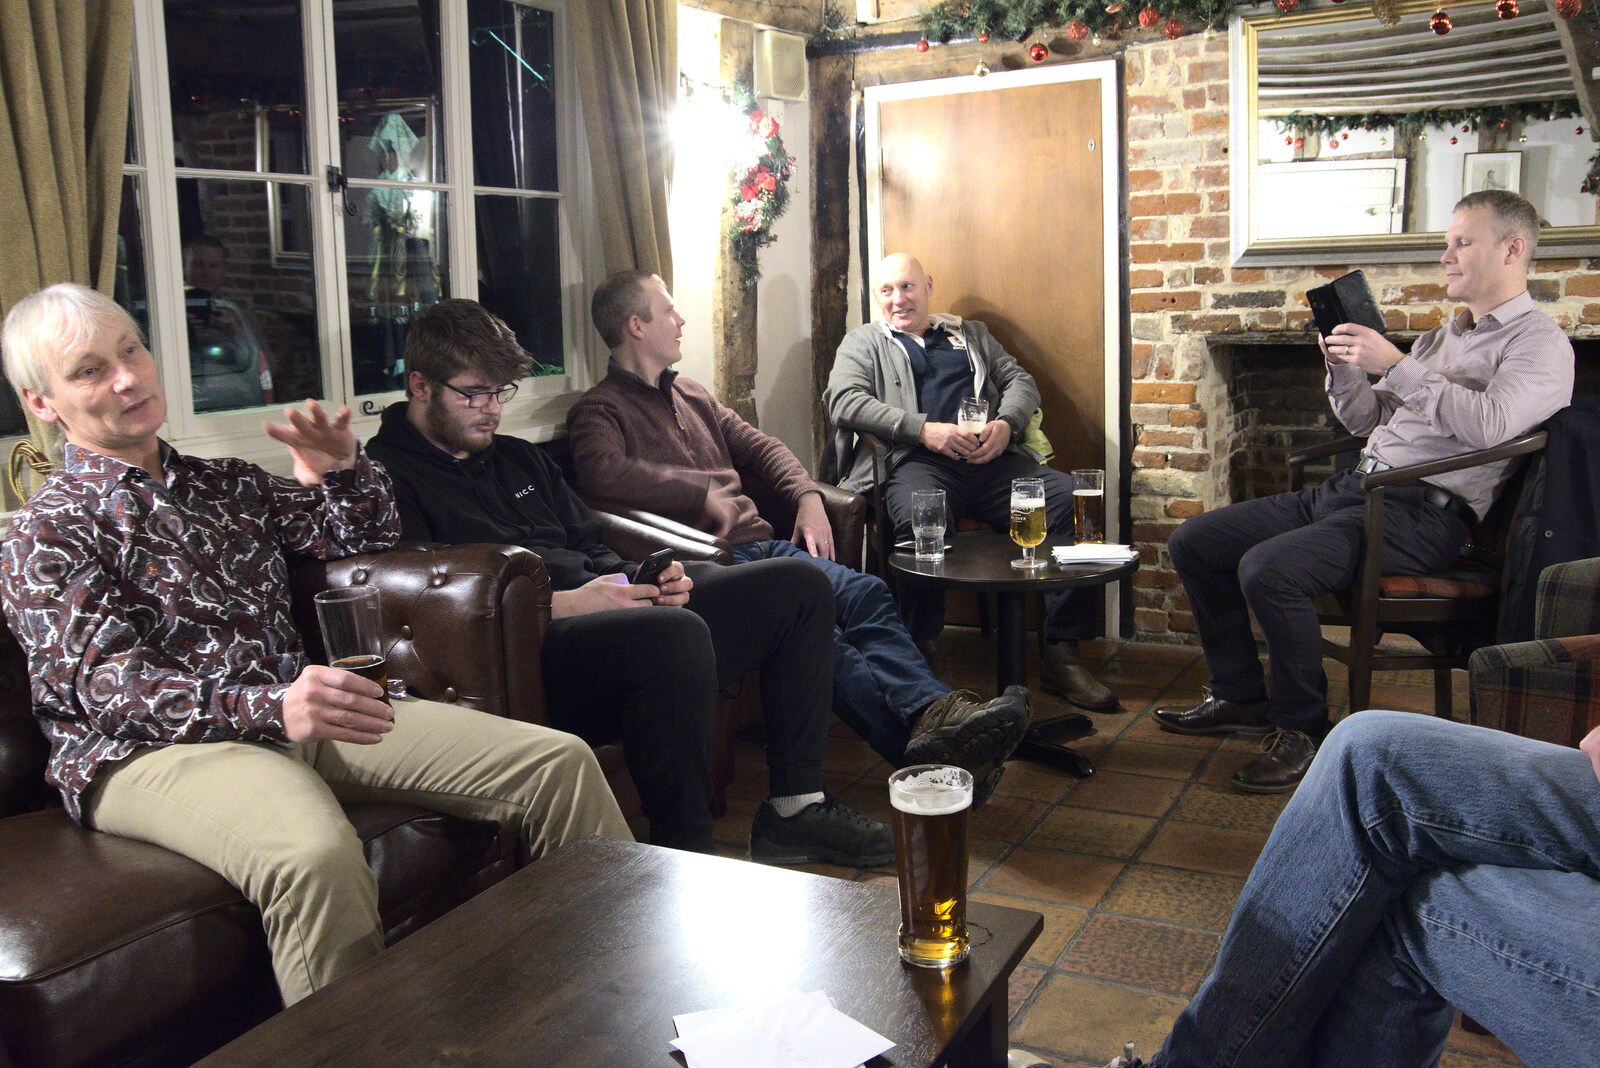 The lads meet up at the Thorndon Black Horse from GSB Carols and Beer With the Lads, Thornham and Thorndon, Suffolk  - 18th December 2021